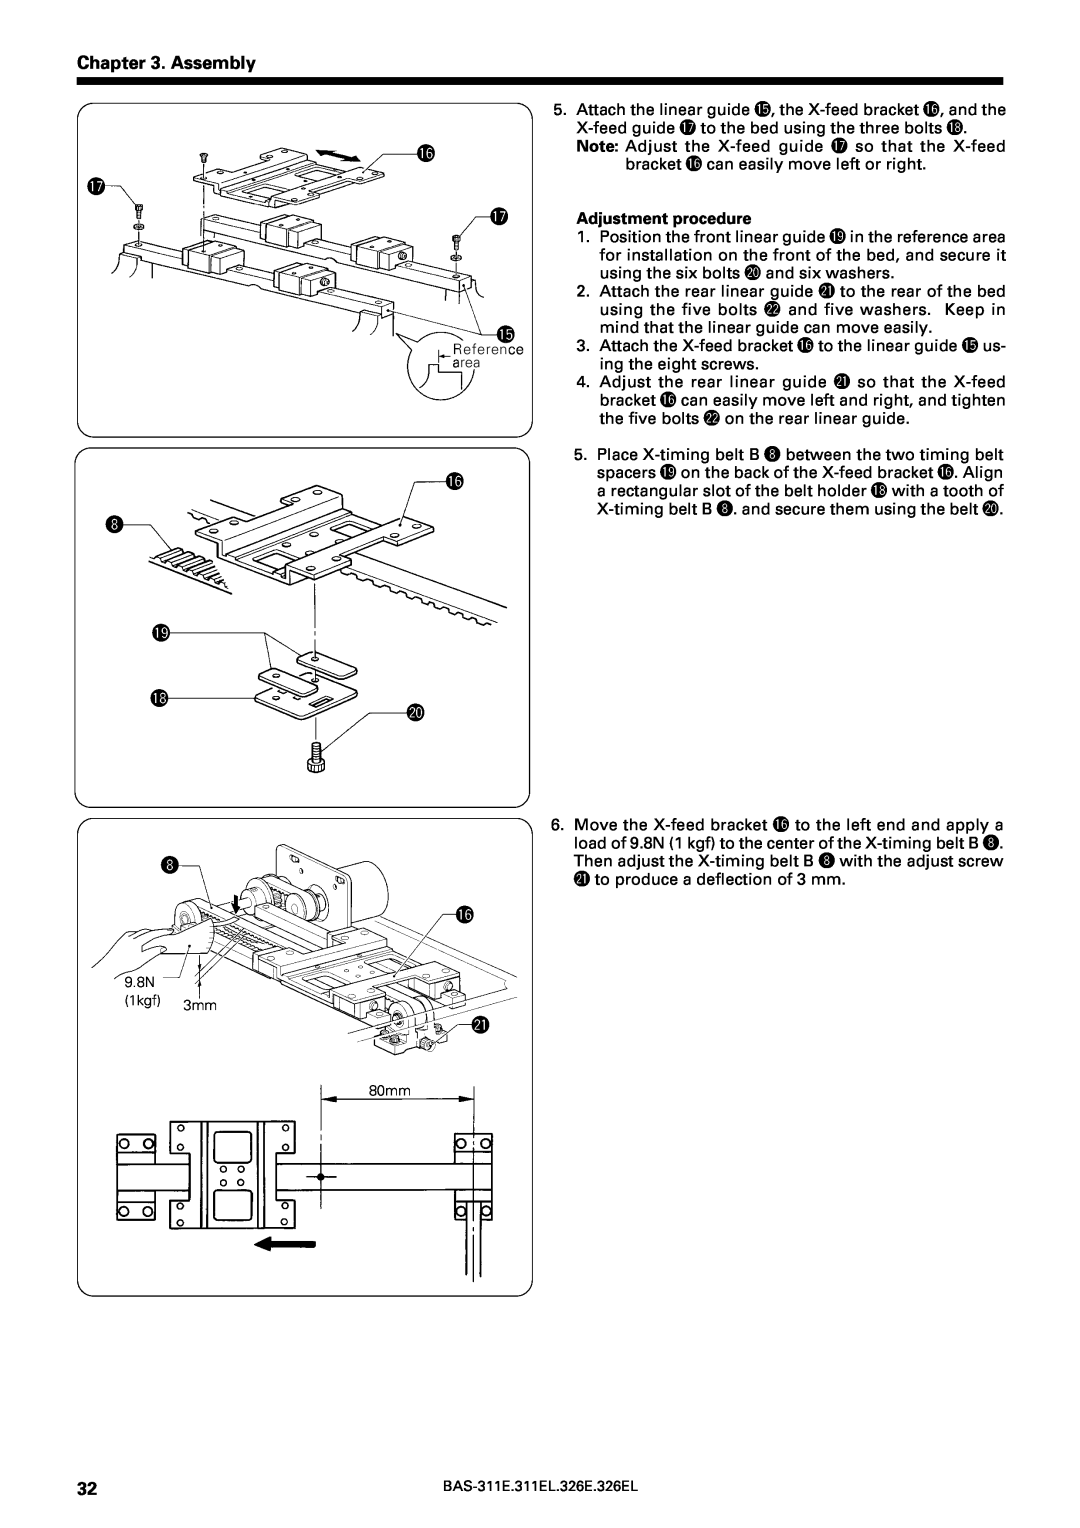 Brother BAS-311E service manual Assembly, Adjustment procedure 